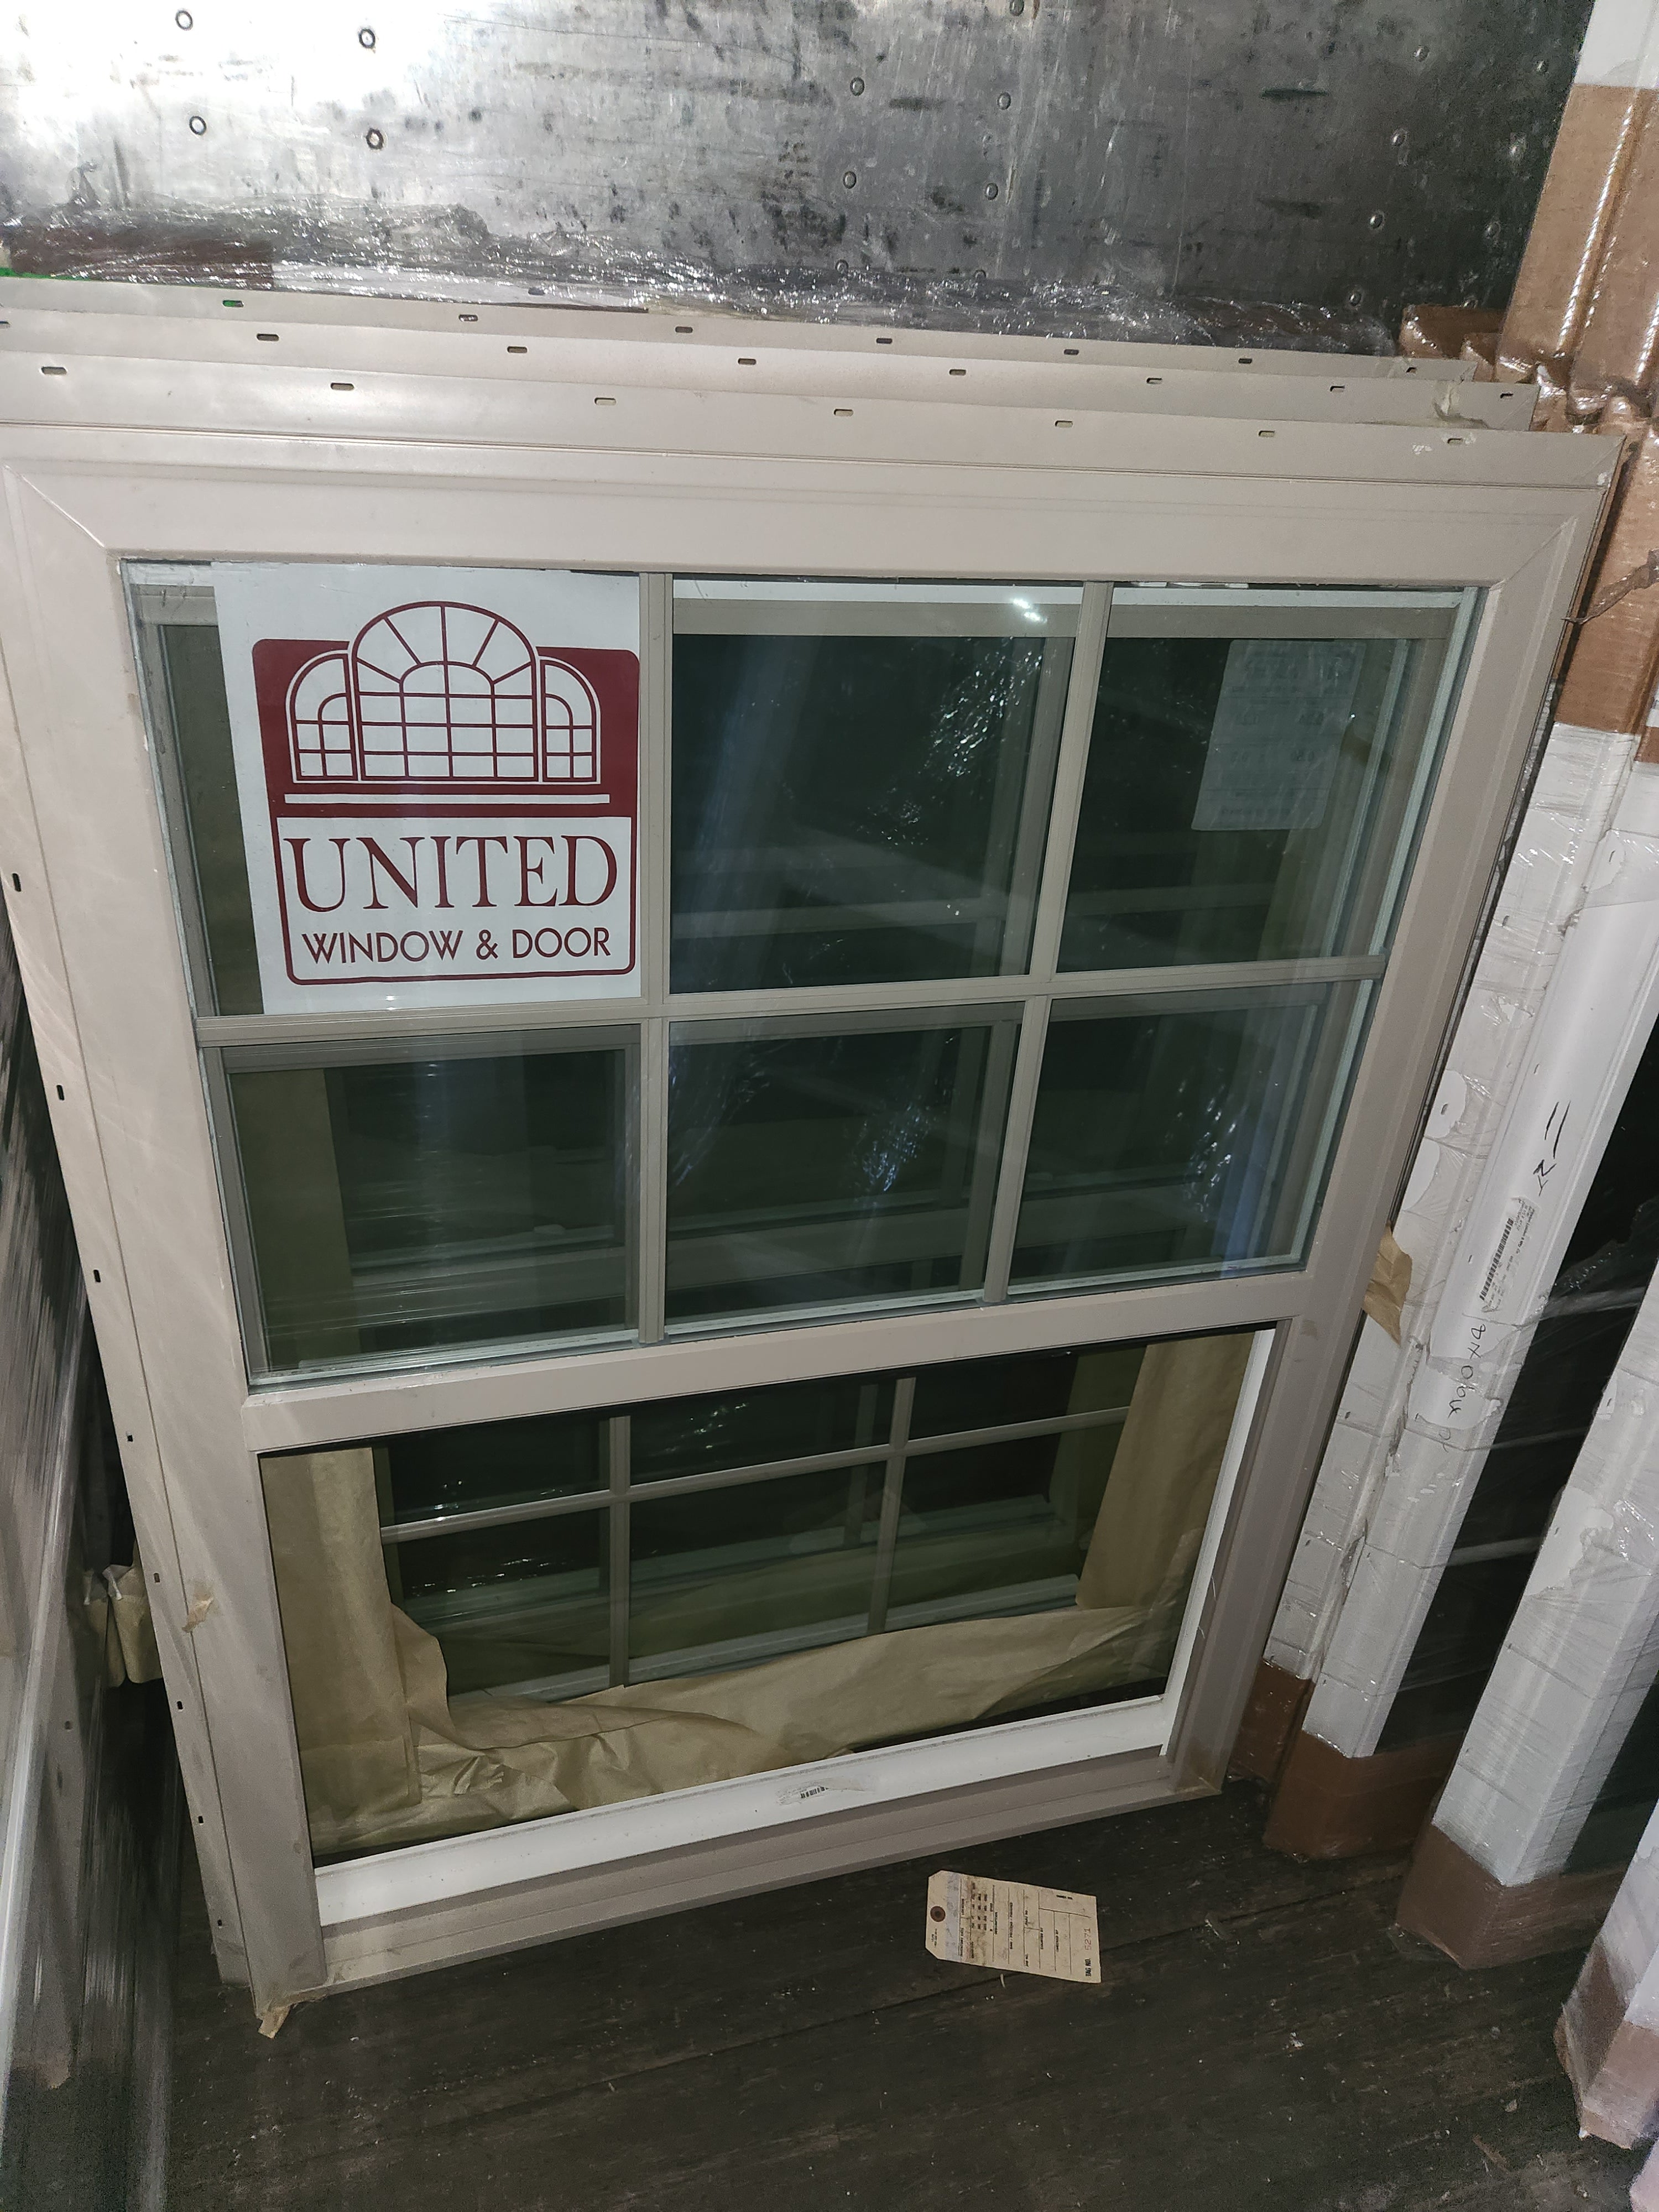 United Windows and Doors s/h 3x4 window clay with grids Low Energy (no Screens)